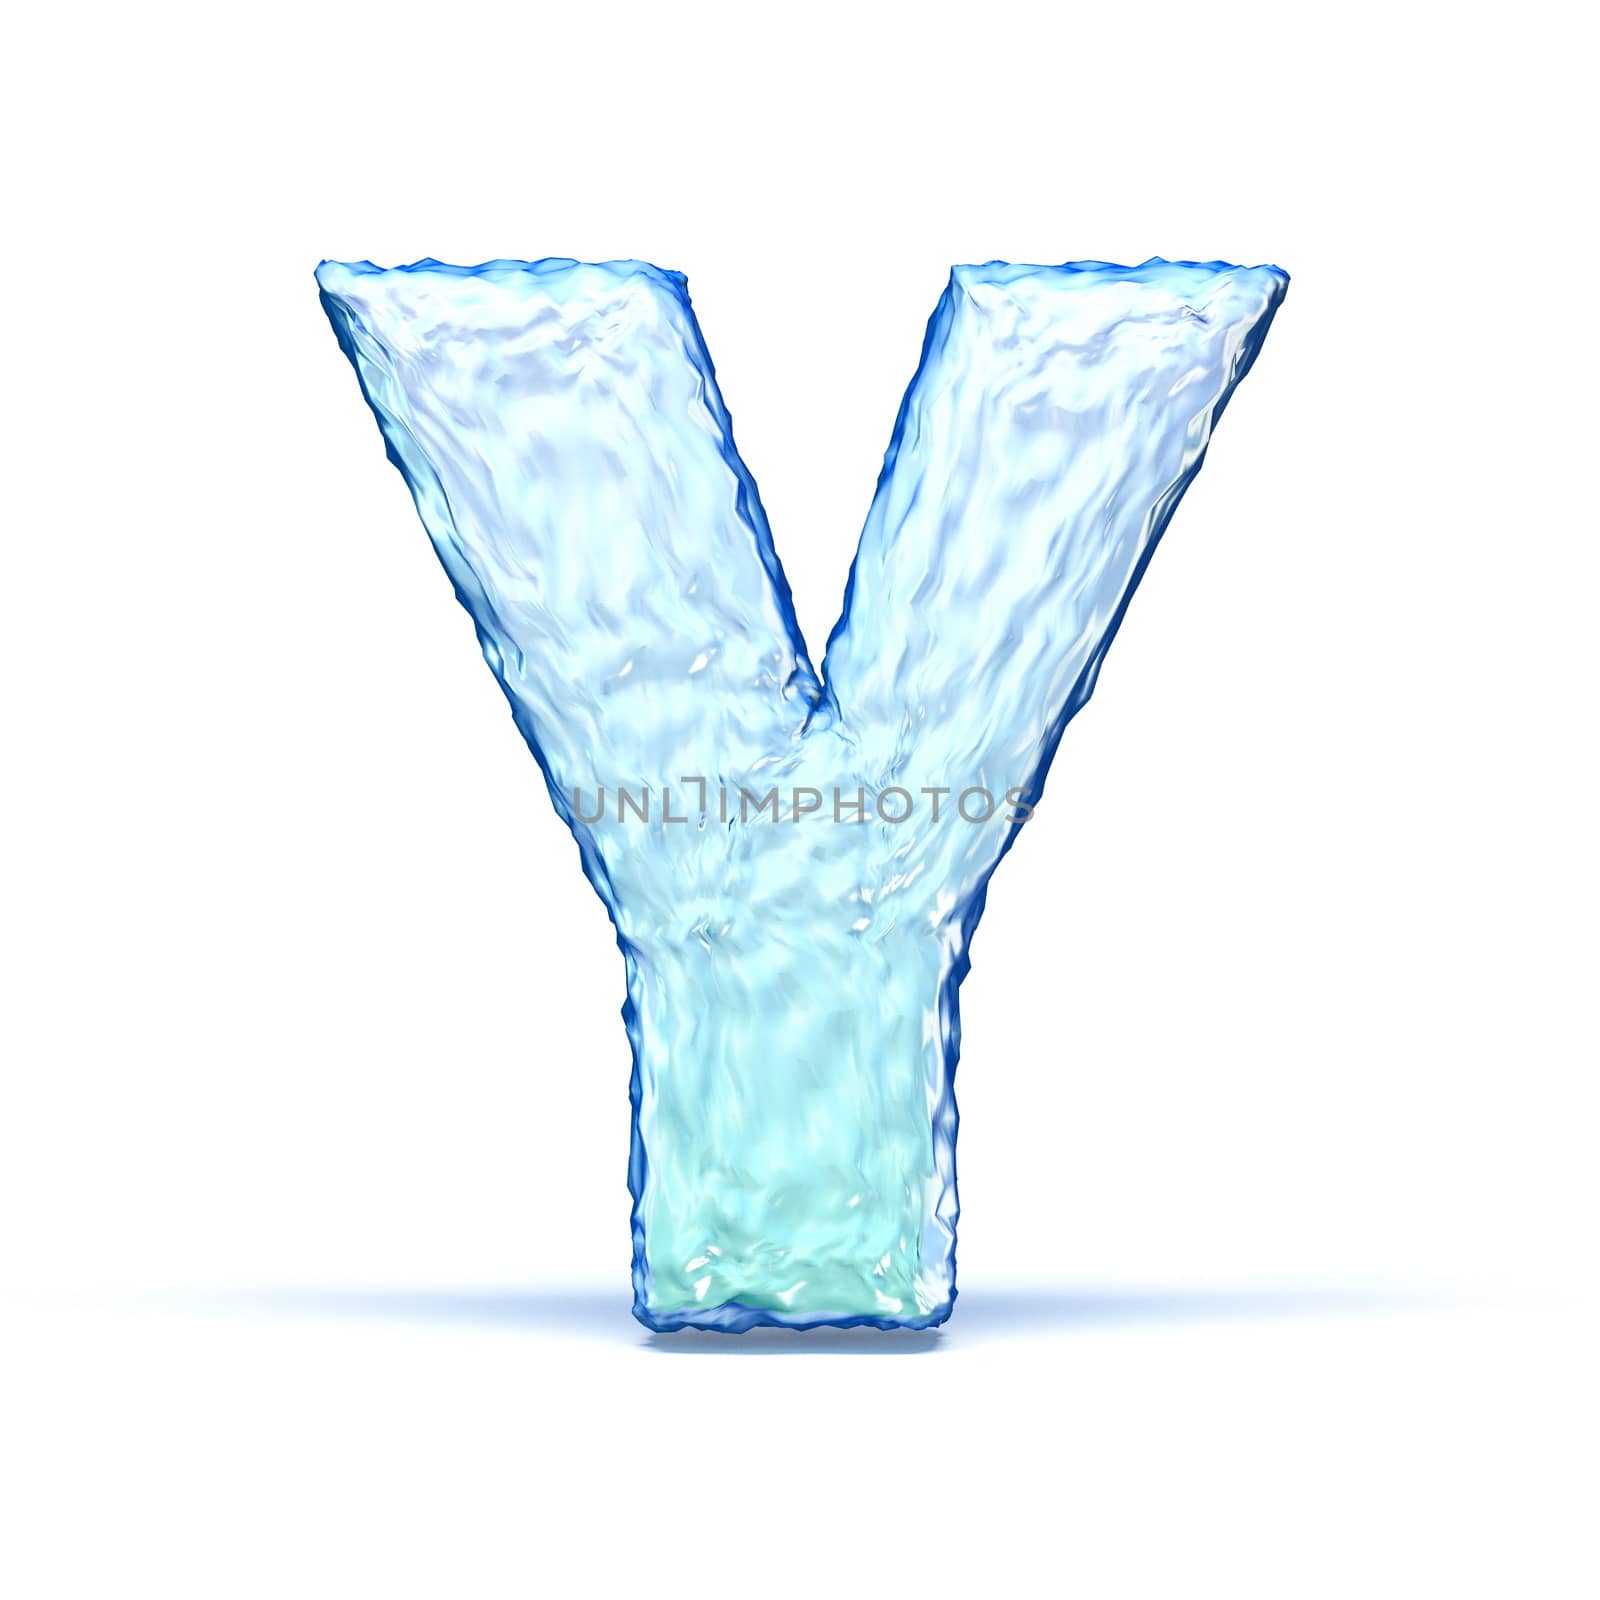 Ice crystal font letter Y 3D render illustration isolated on white background